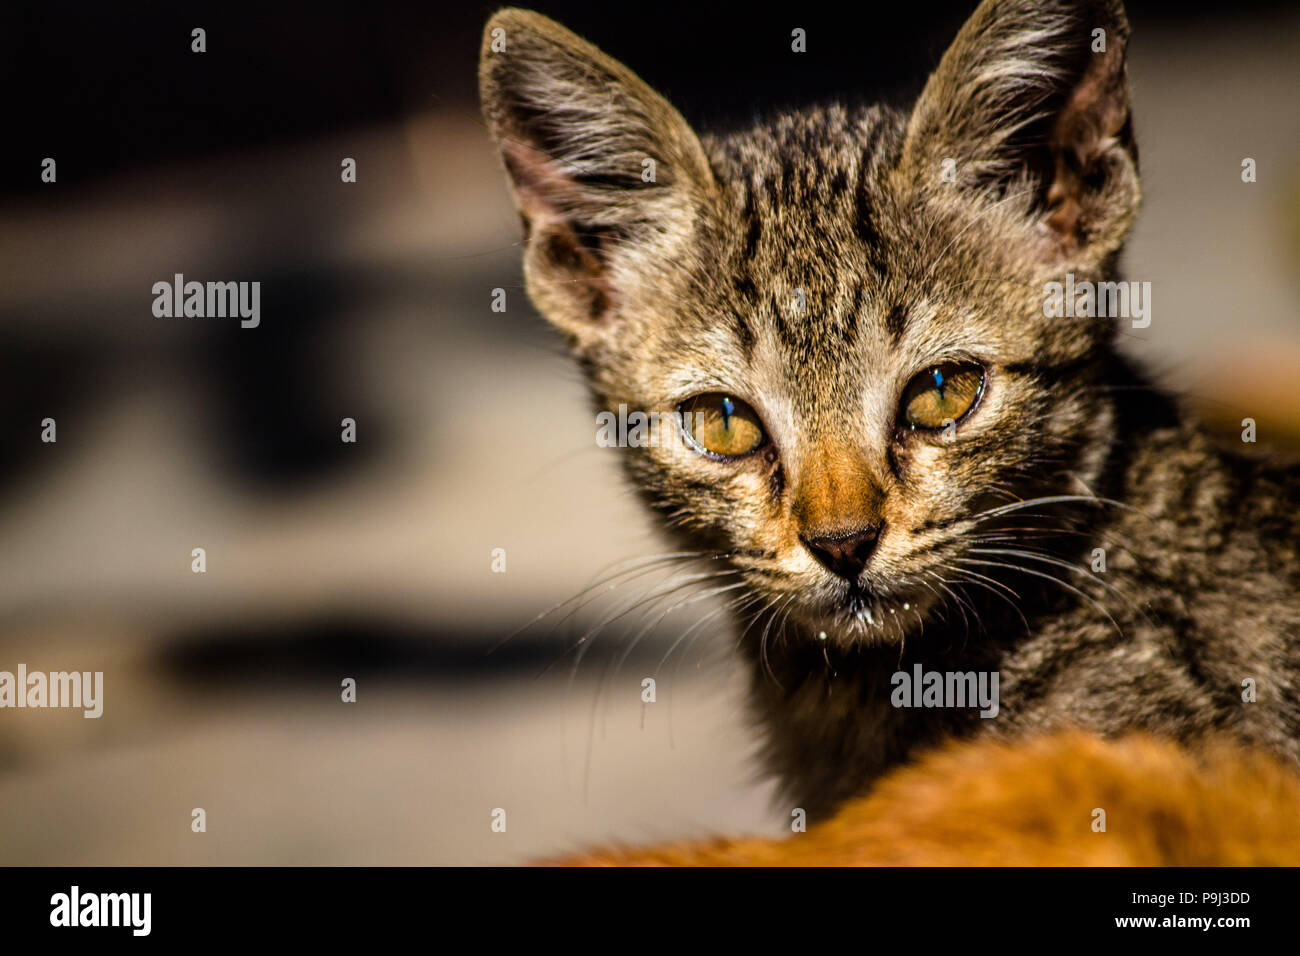 Best Cat Photo For Stock Use Stock Photo